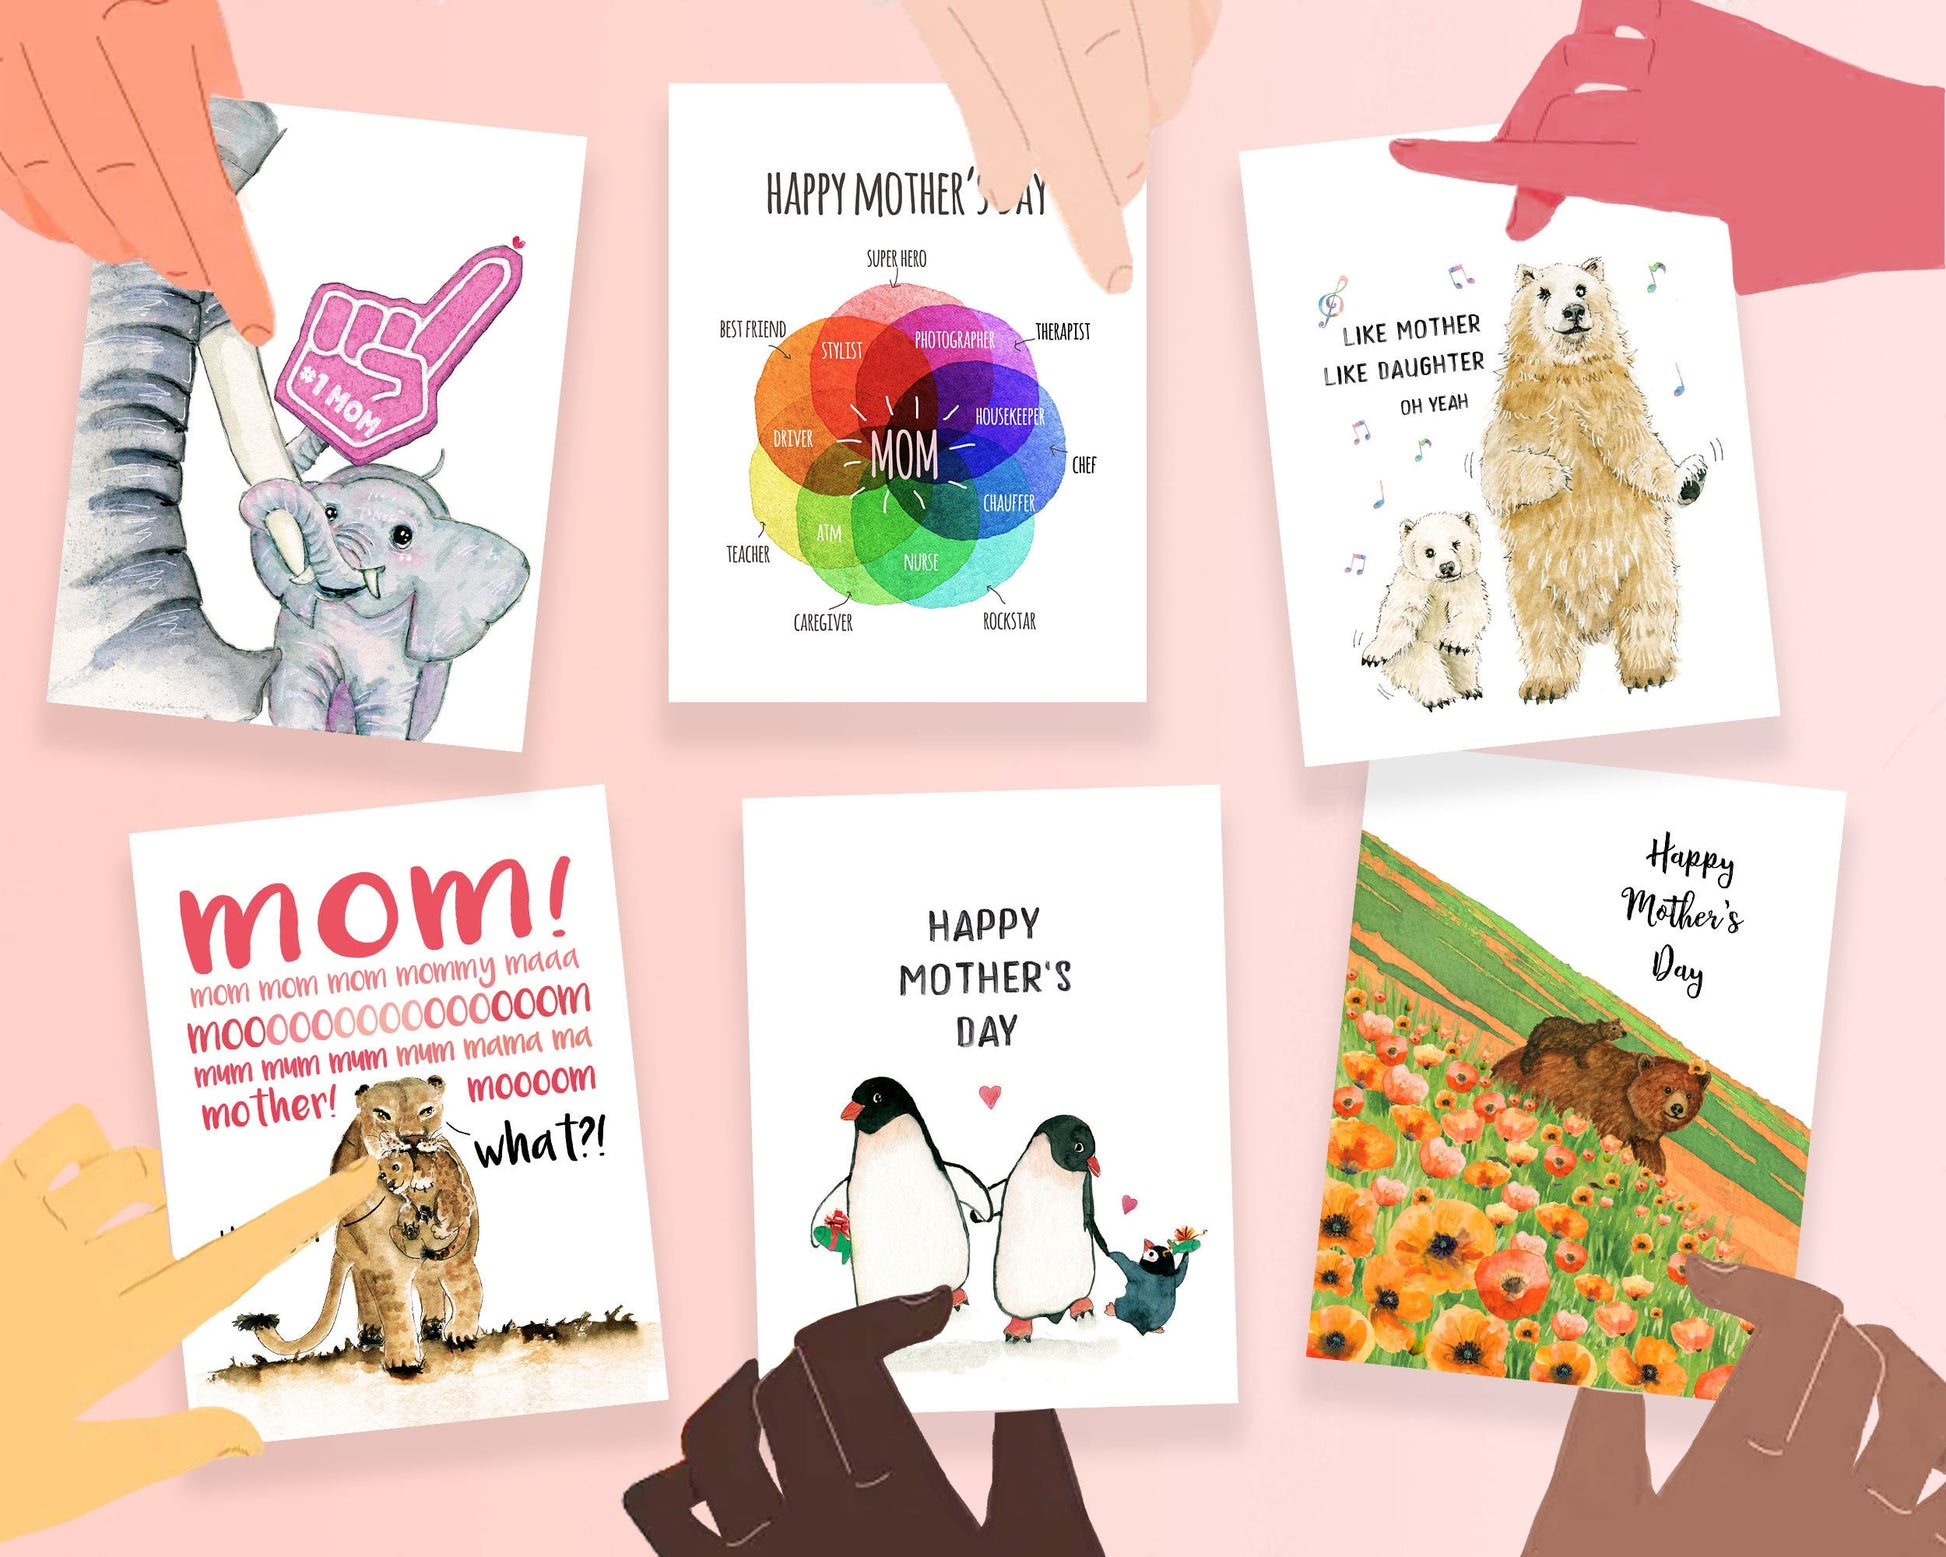 Happy First Mother's Day Card From Your Bump - Funny Mothers Day Card For Pregnant Mom - Expecting Mom To Be Gift For Wife